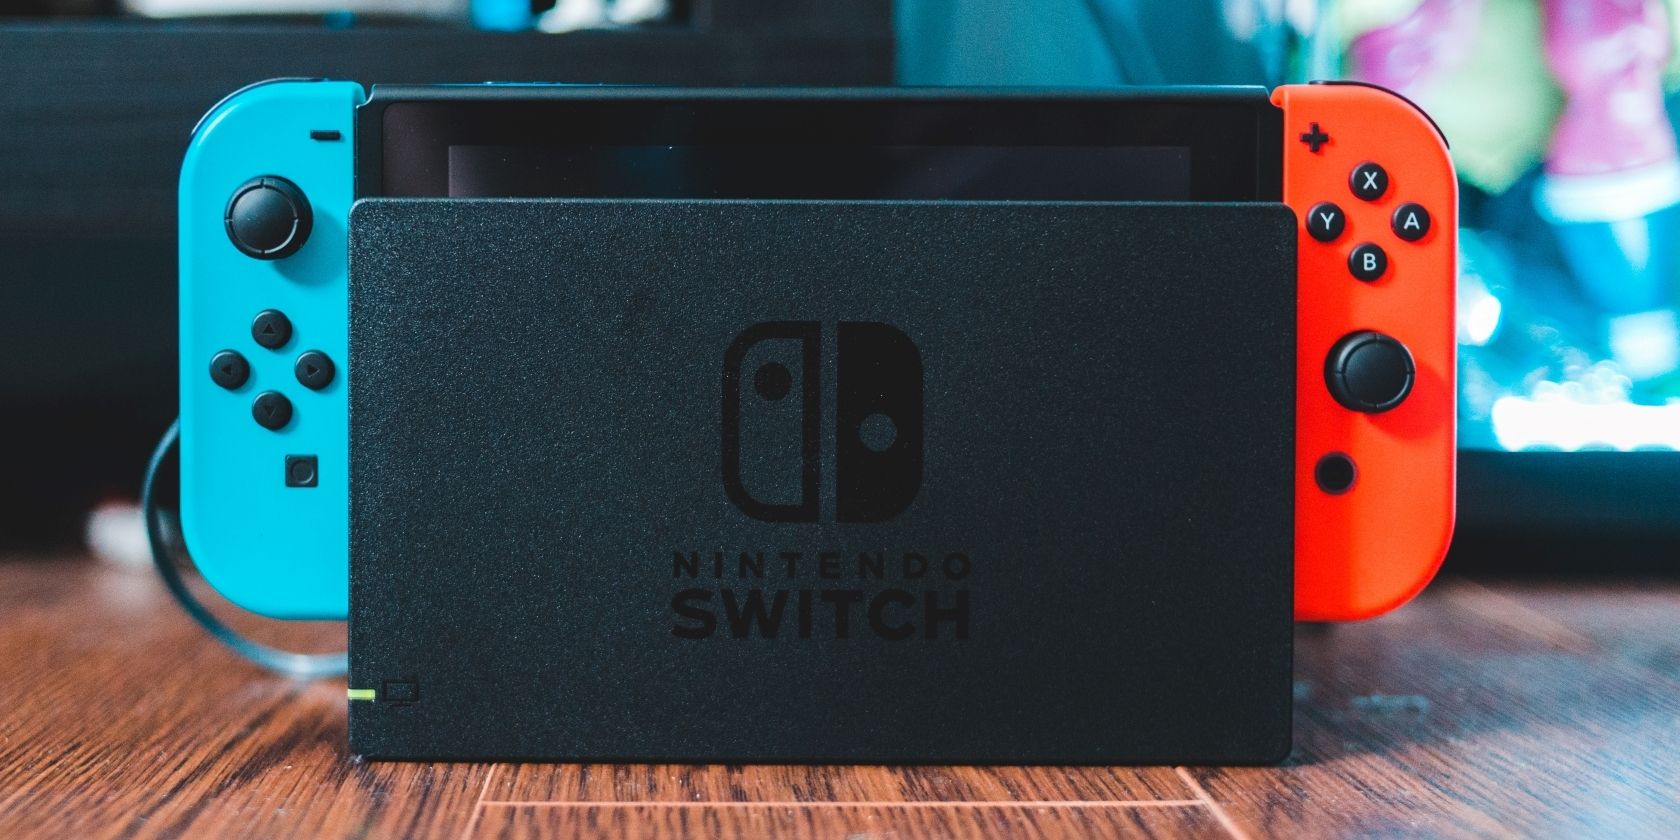 A photograph of a docked Nintendo Switch